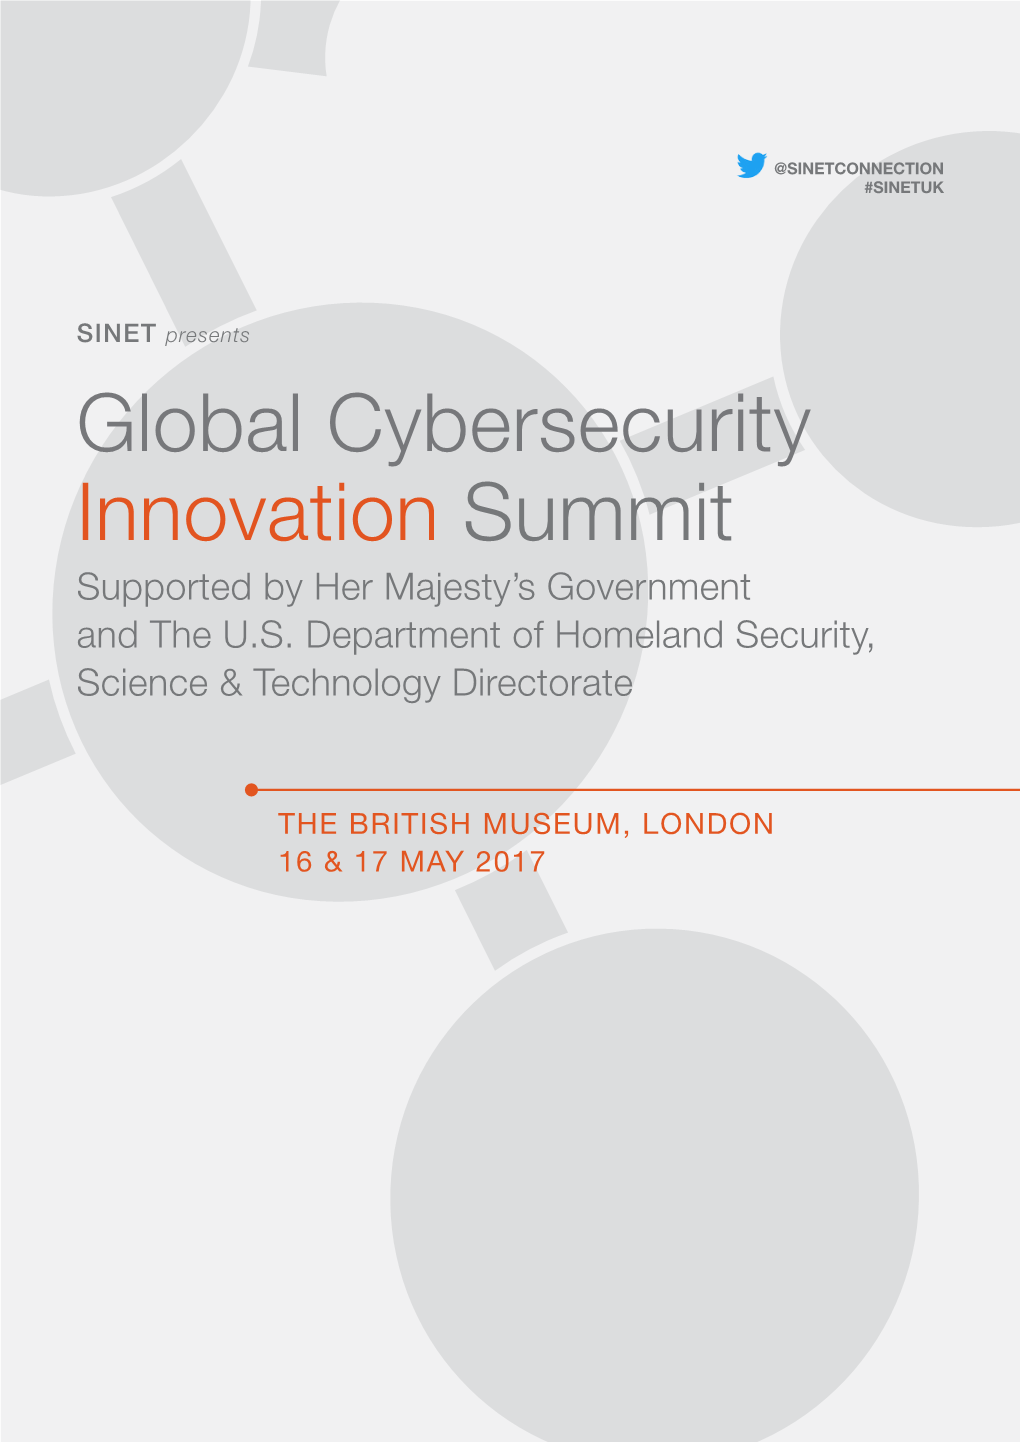 Global Cybersecurity Innovation Summit Supported by Her Majesty’S Government and the U.S